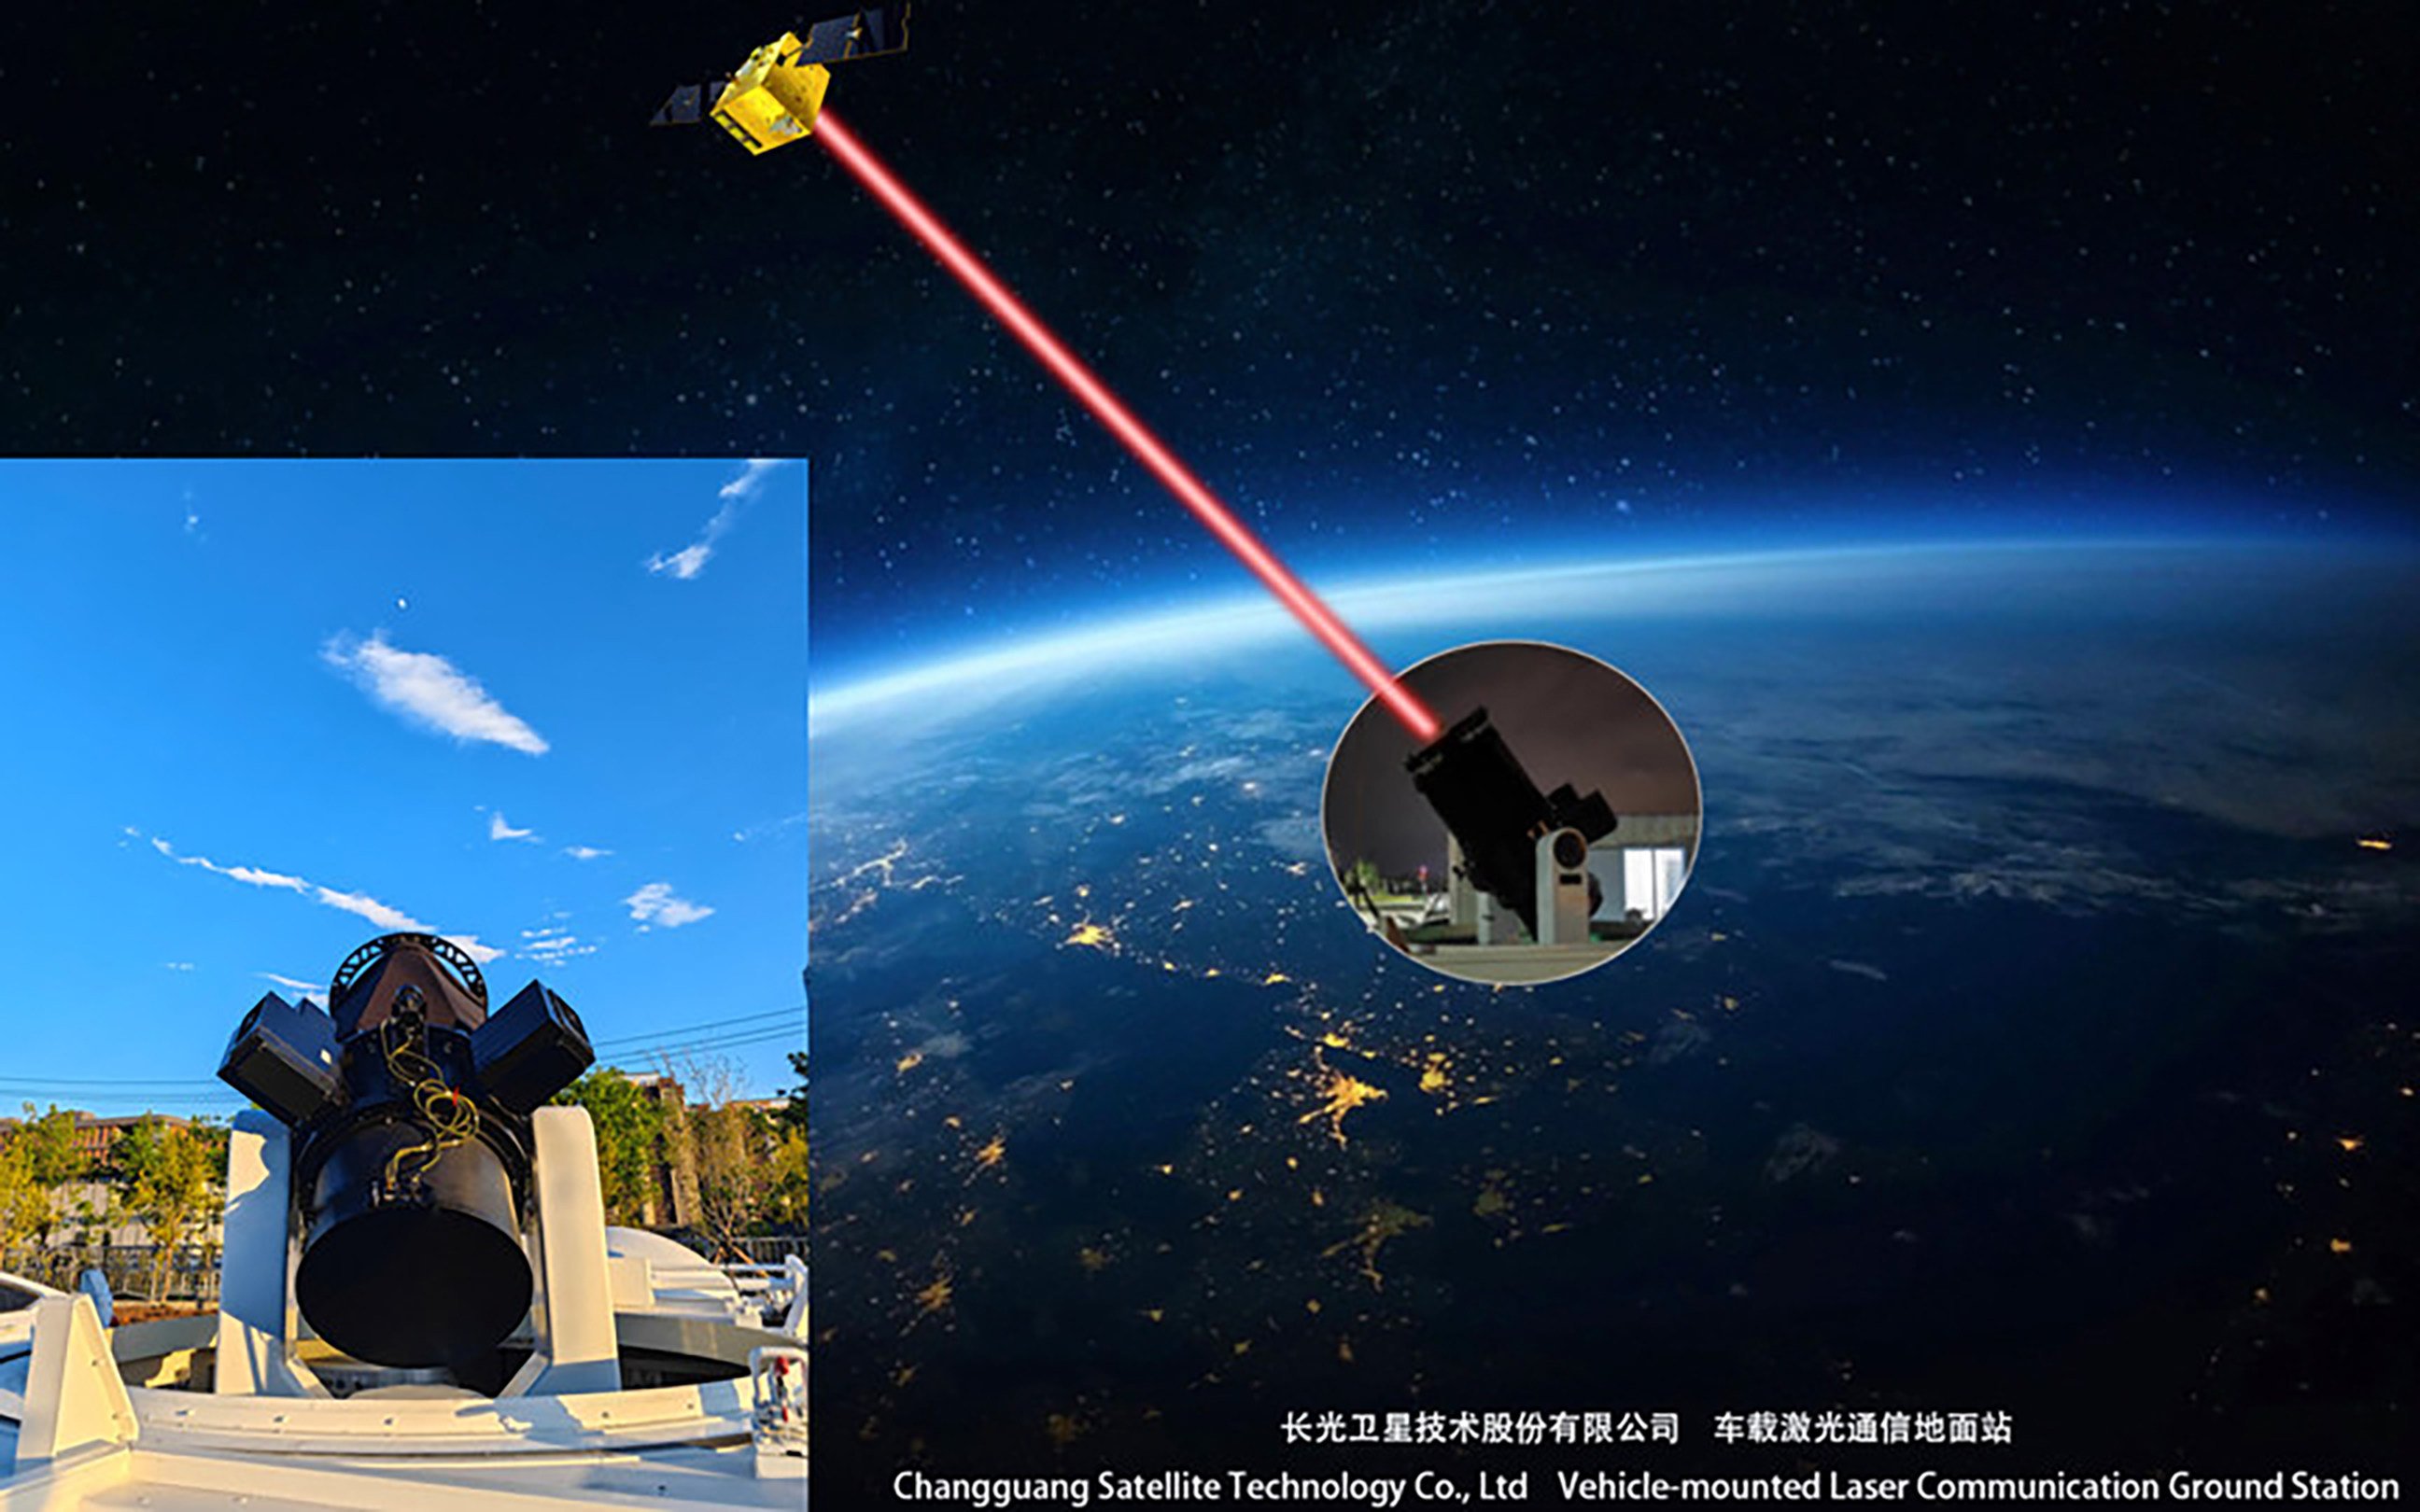 By coordinating with ground stations, the Jilin-1 satellite constellation can track with enhanced accuracy. Photo: CGST